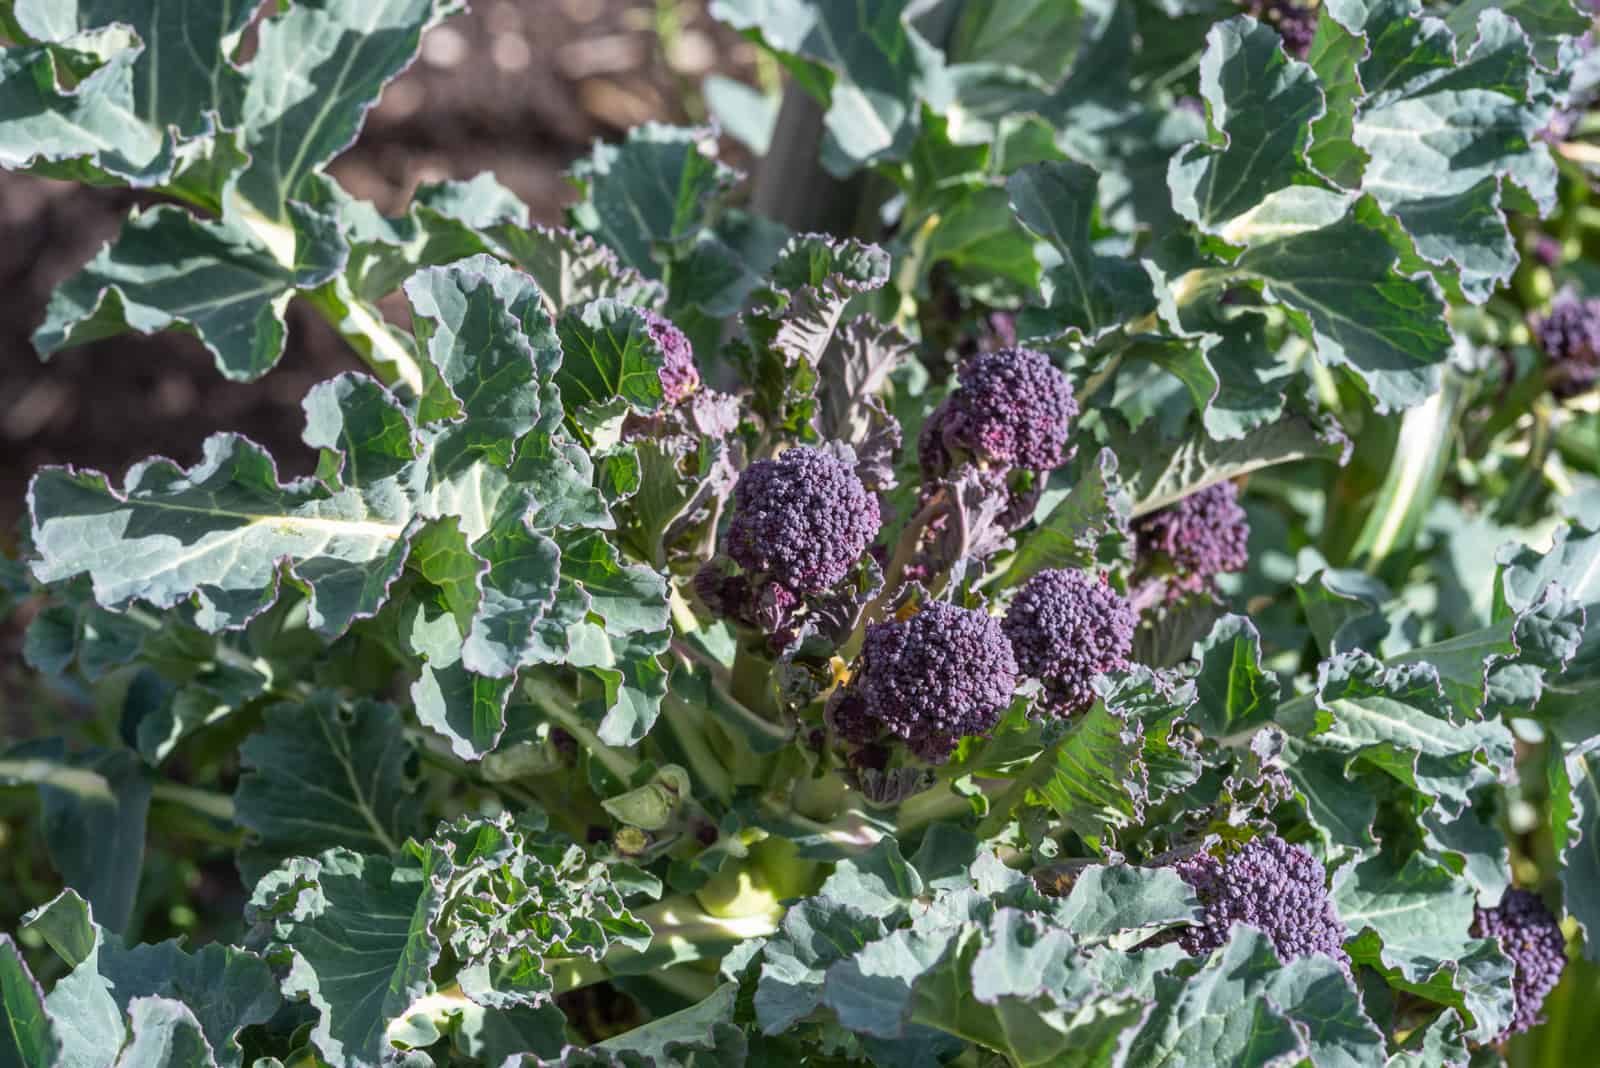 Blooming Broccoli: All You Need To Know About This Tasty Veg